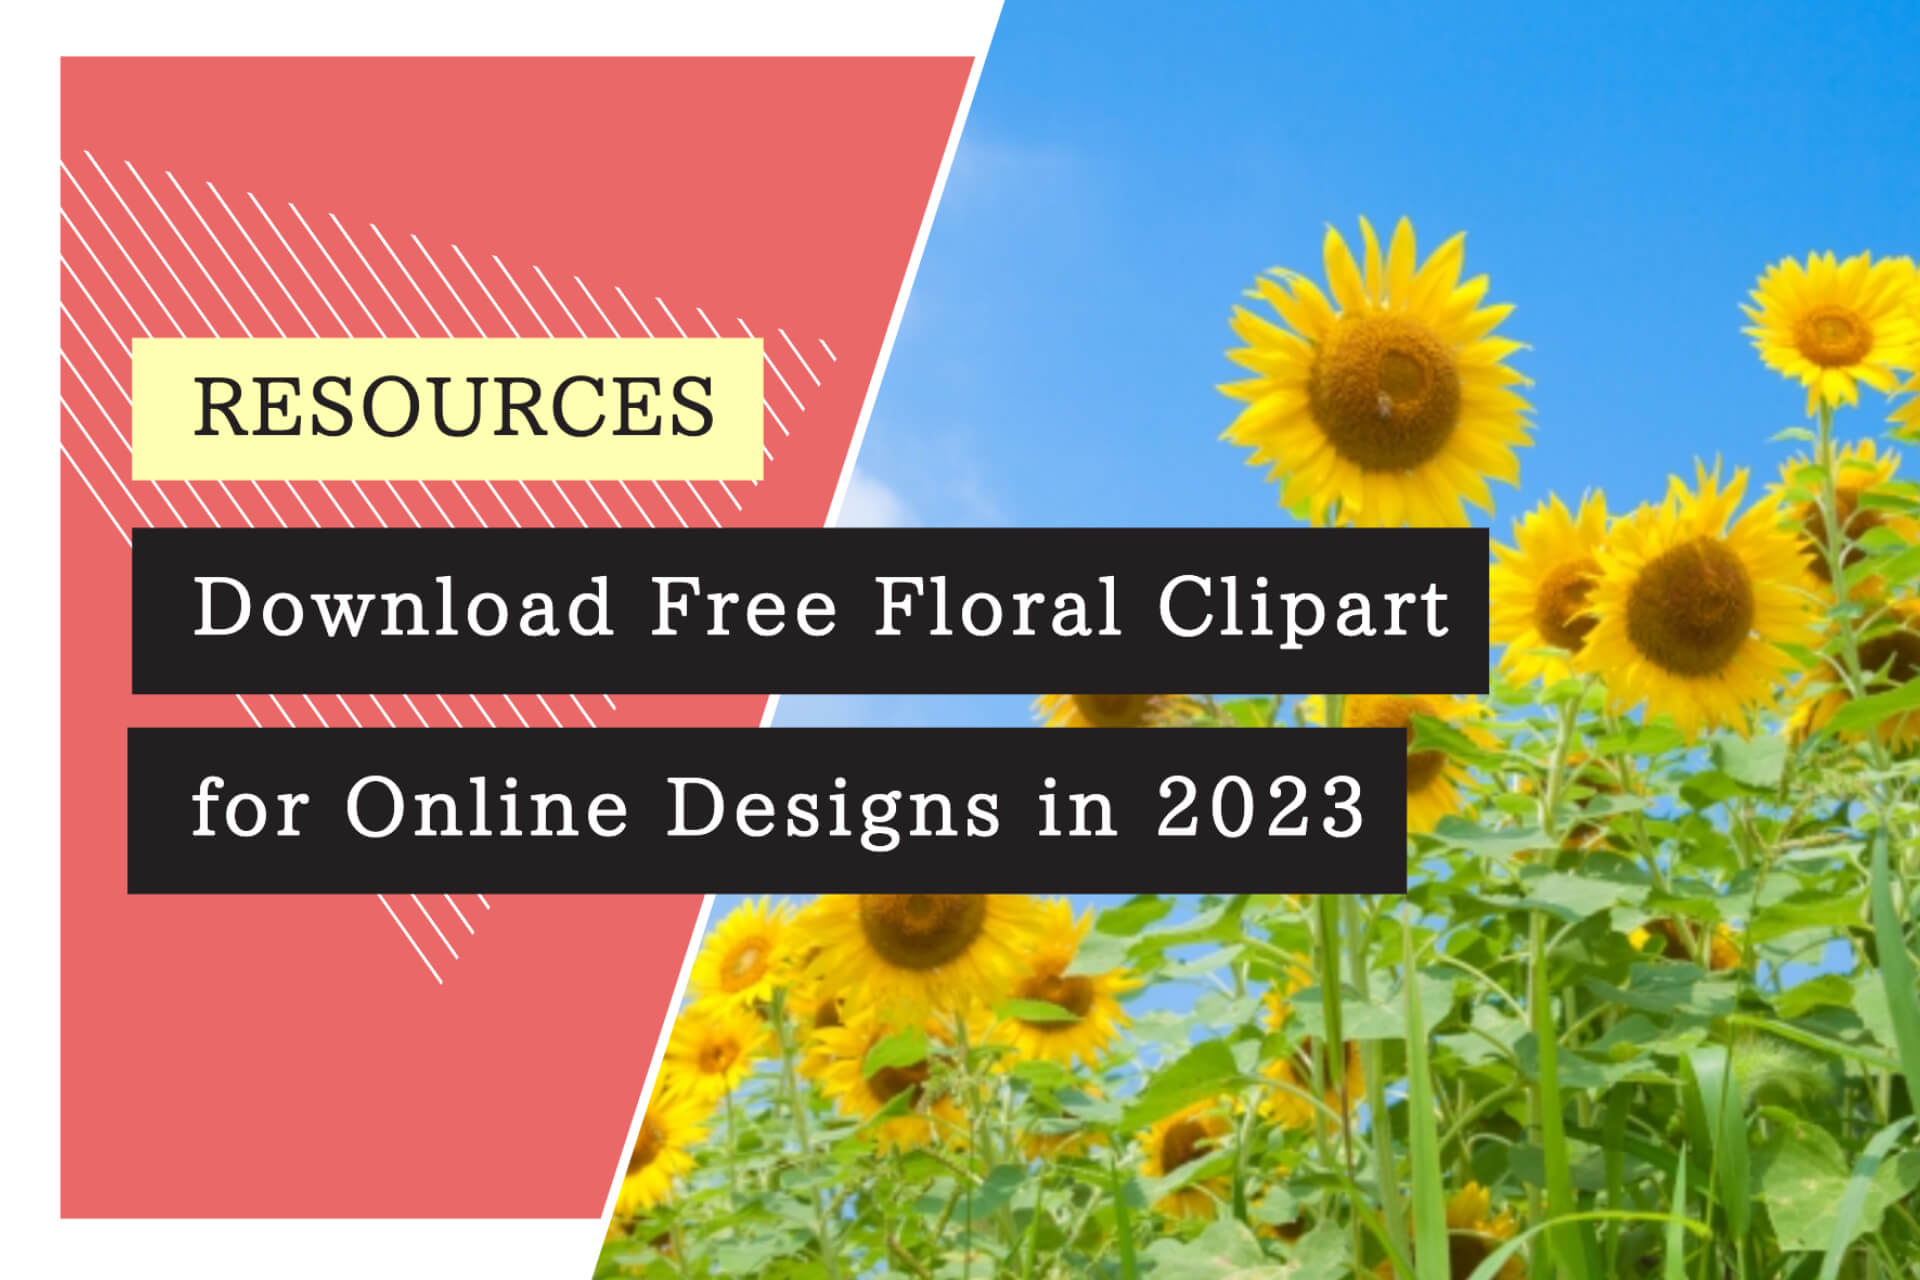 Download Free Floral Clipart for Online Designs in 2023